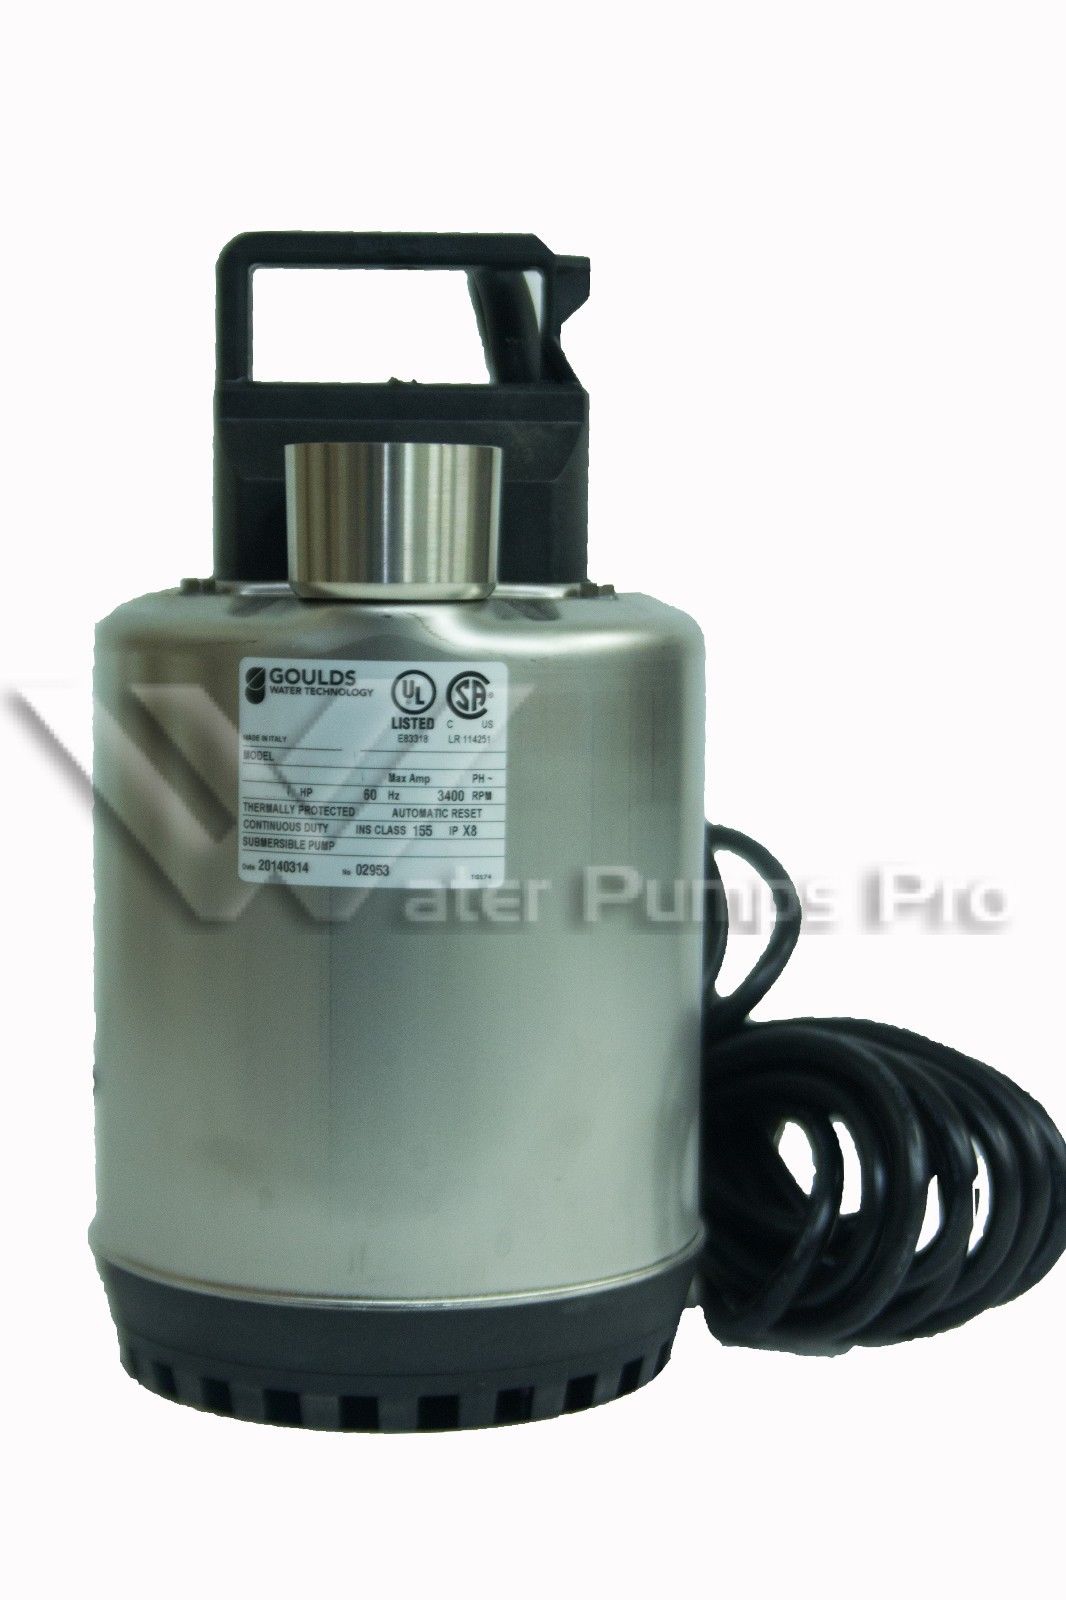 Goulds LSP0712F 3/4HP 230V- Submersible Sump Pump